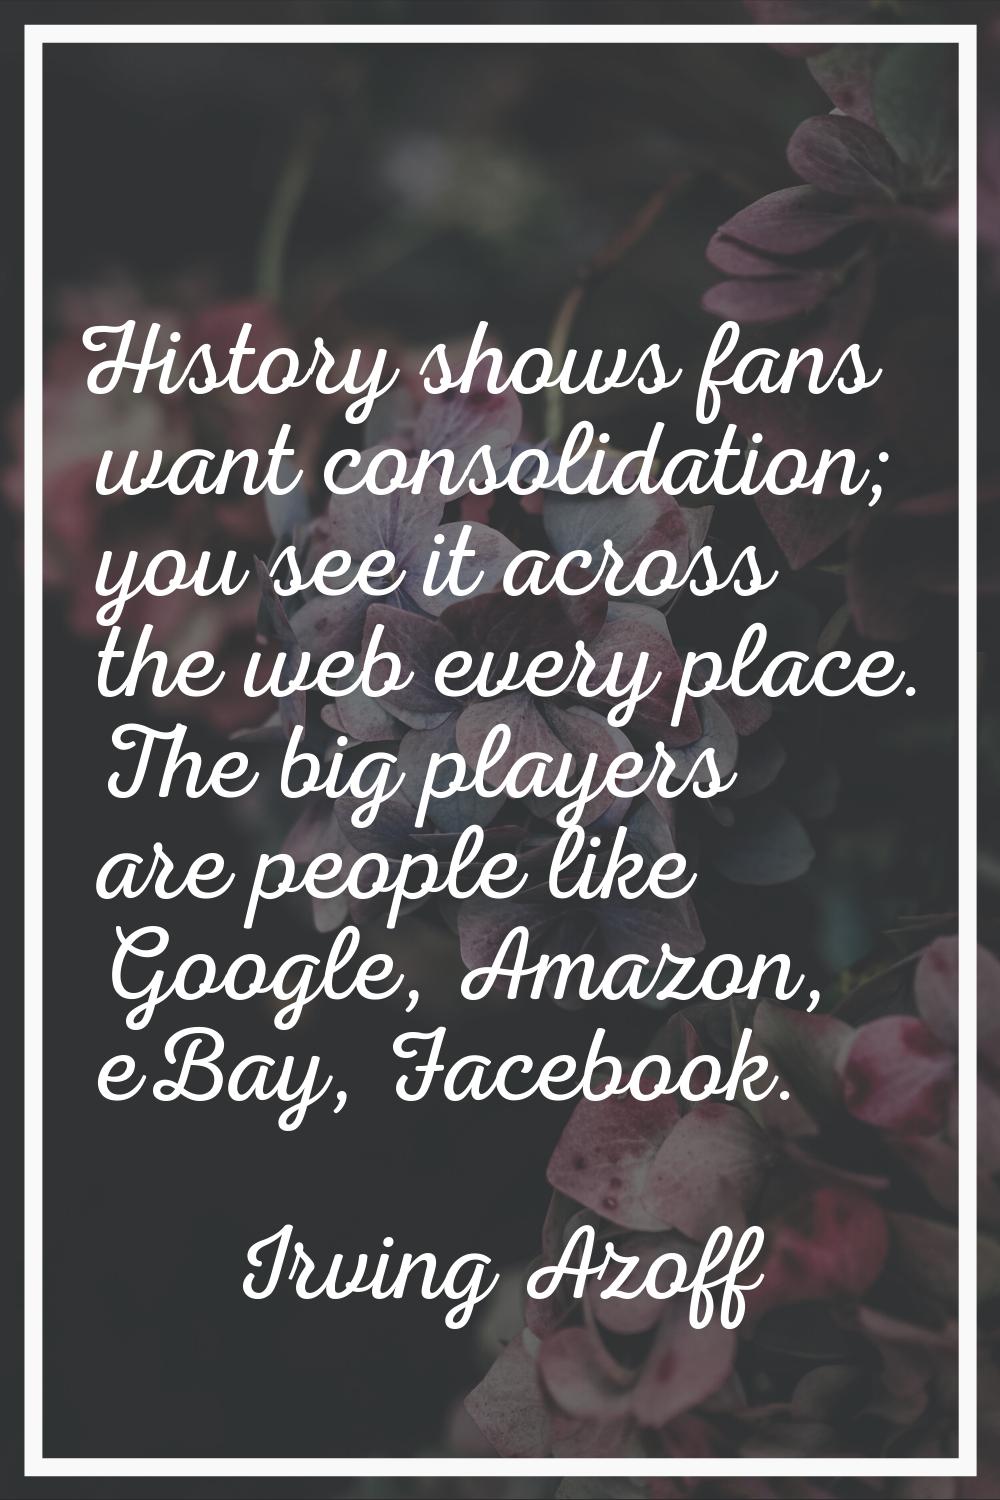 History shows fans want consolidation; you see it across the web every place. The big players are p